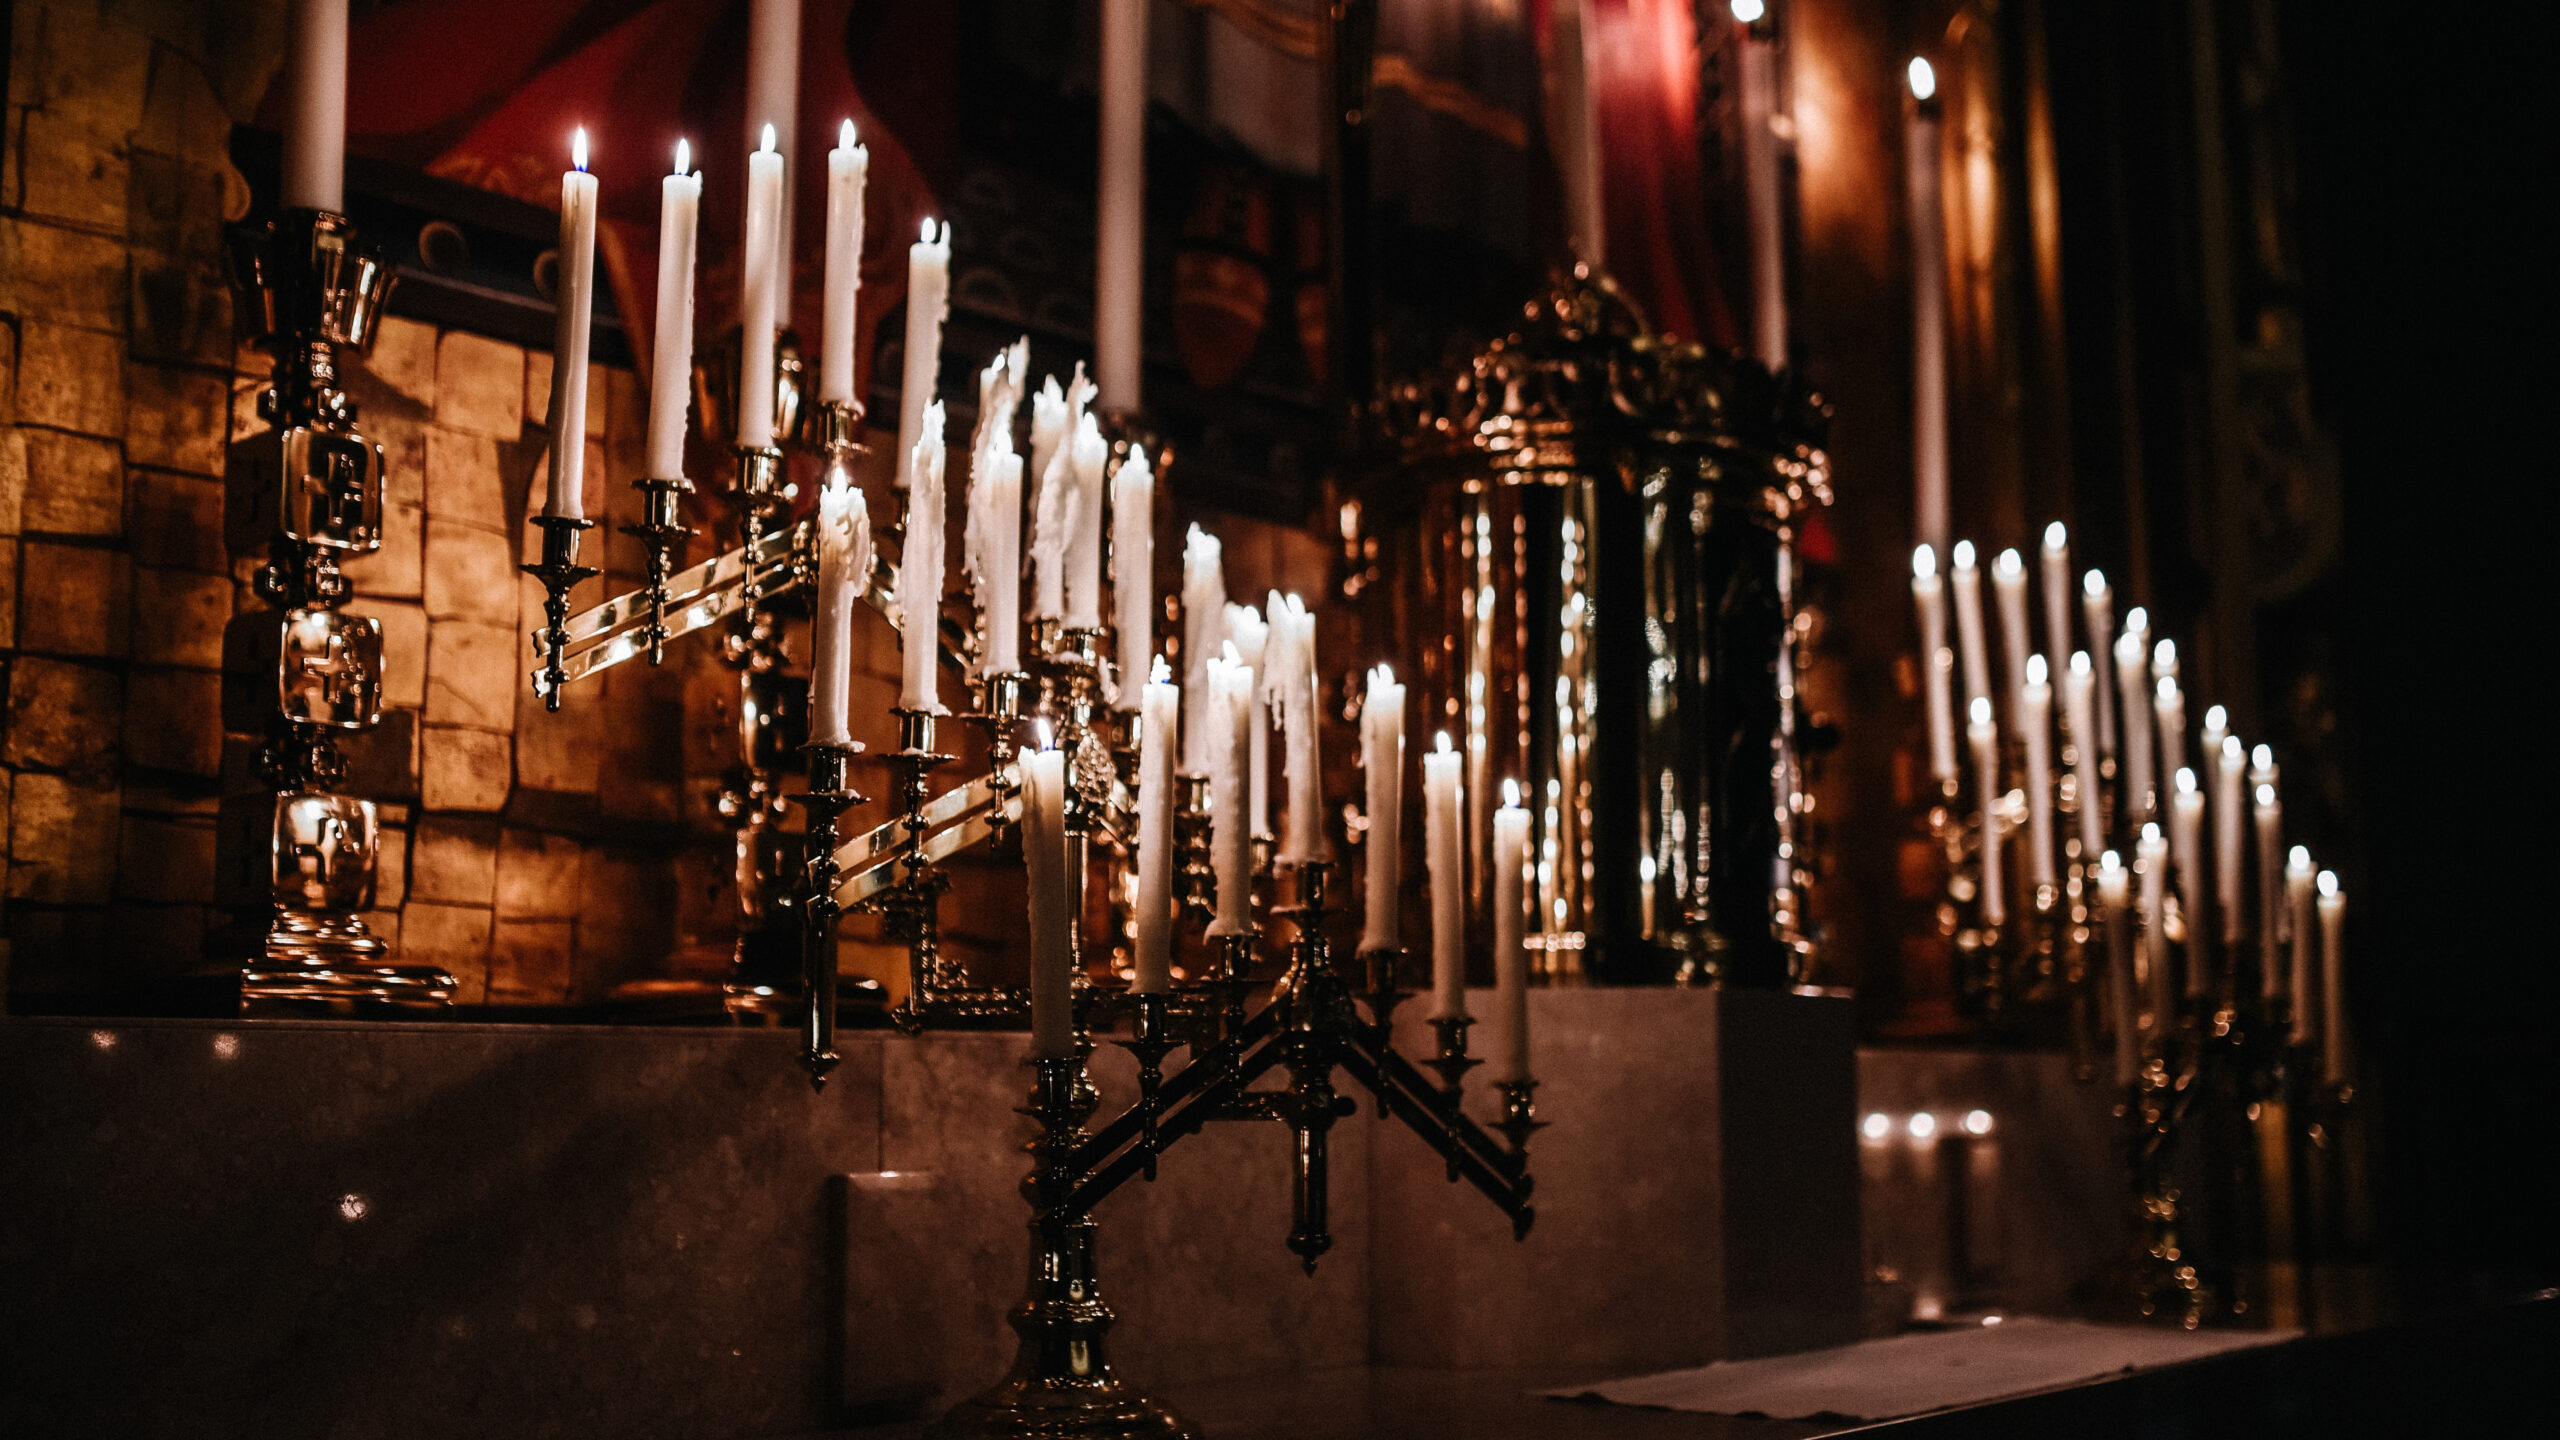 Candlemas in Church setting